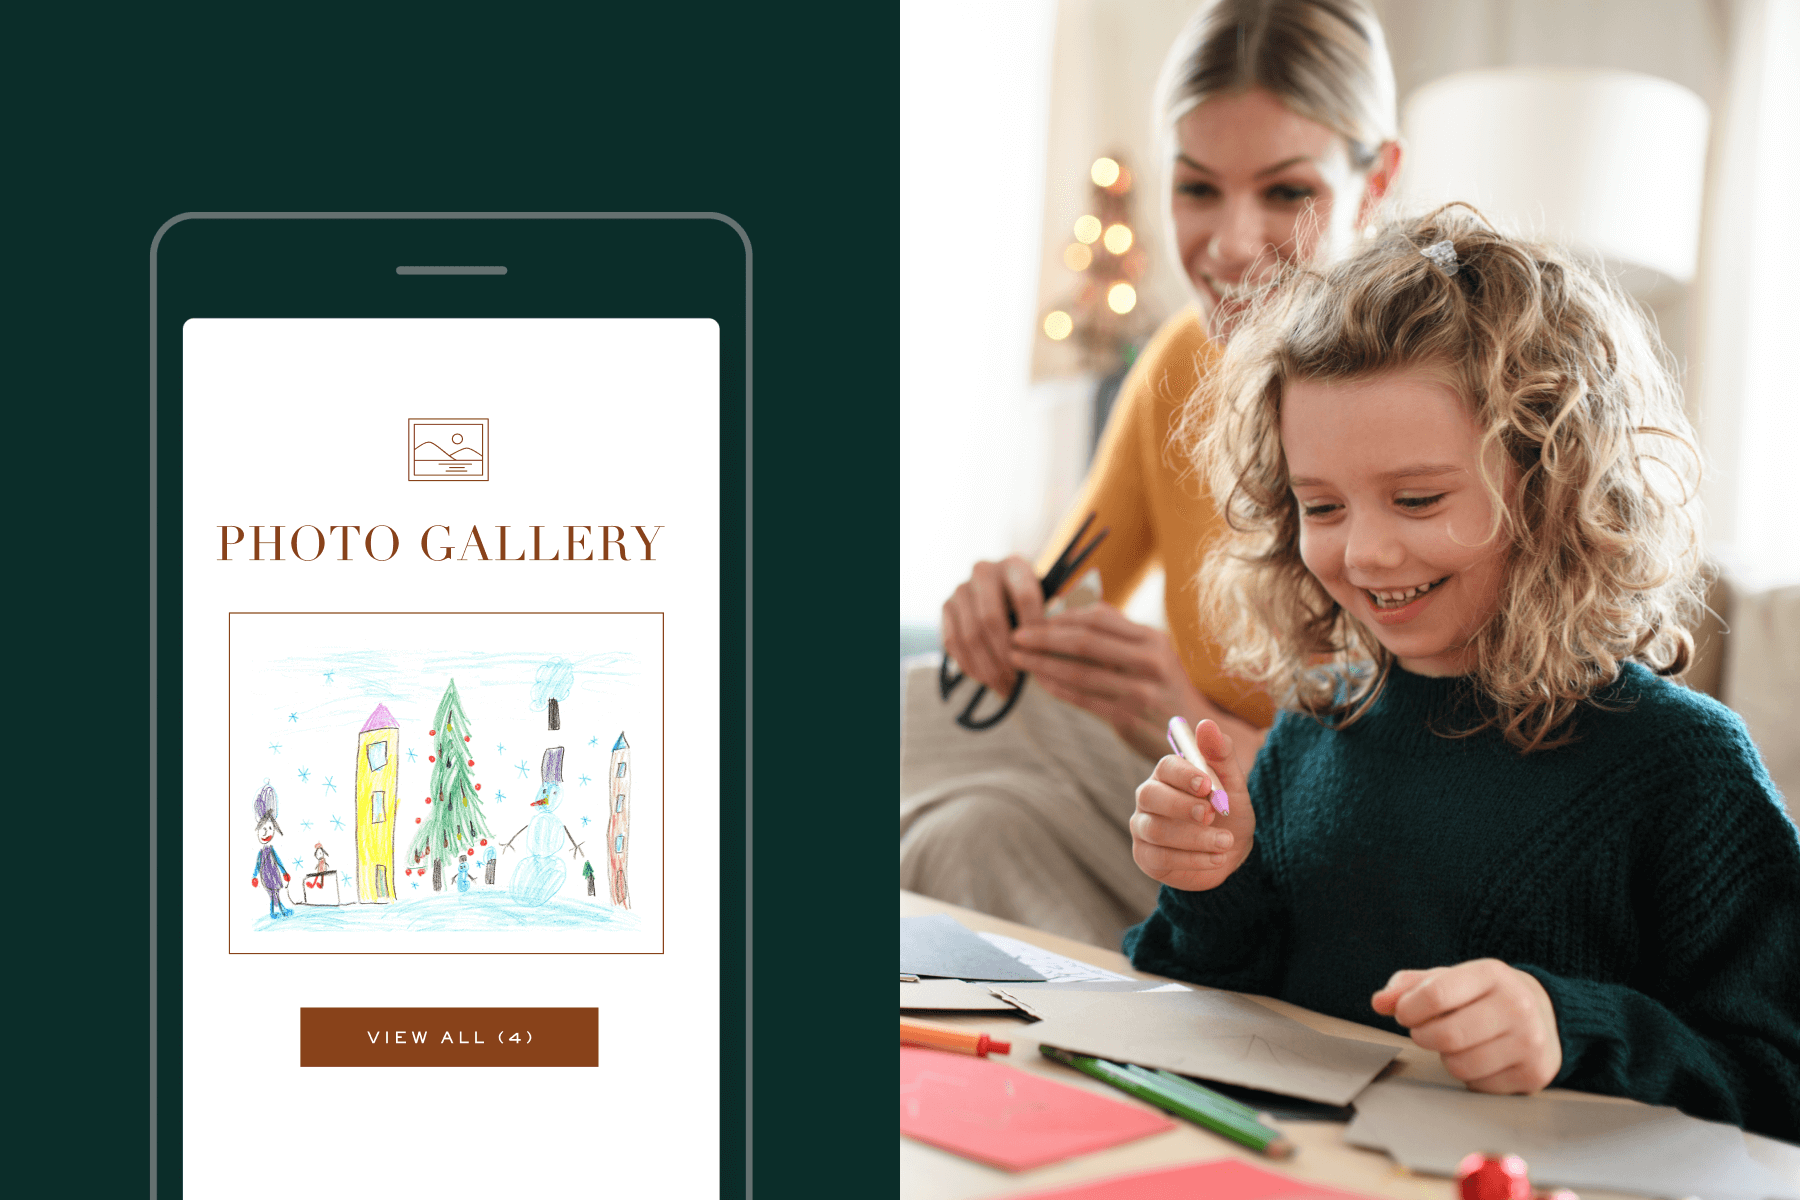 Left: An outline of a smartphone with Paperless Post’s Photo Gallery Block featuring a child’s Christmas drawing. Right: A smiling child holds a pen above colorful pieces of paper with a woman holding scissors behind her.